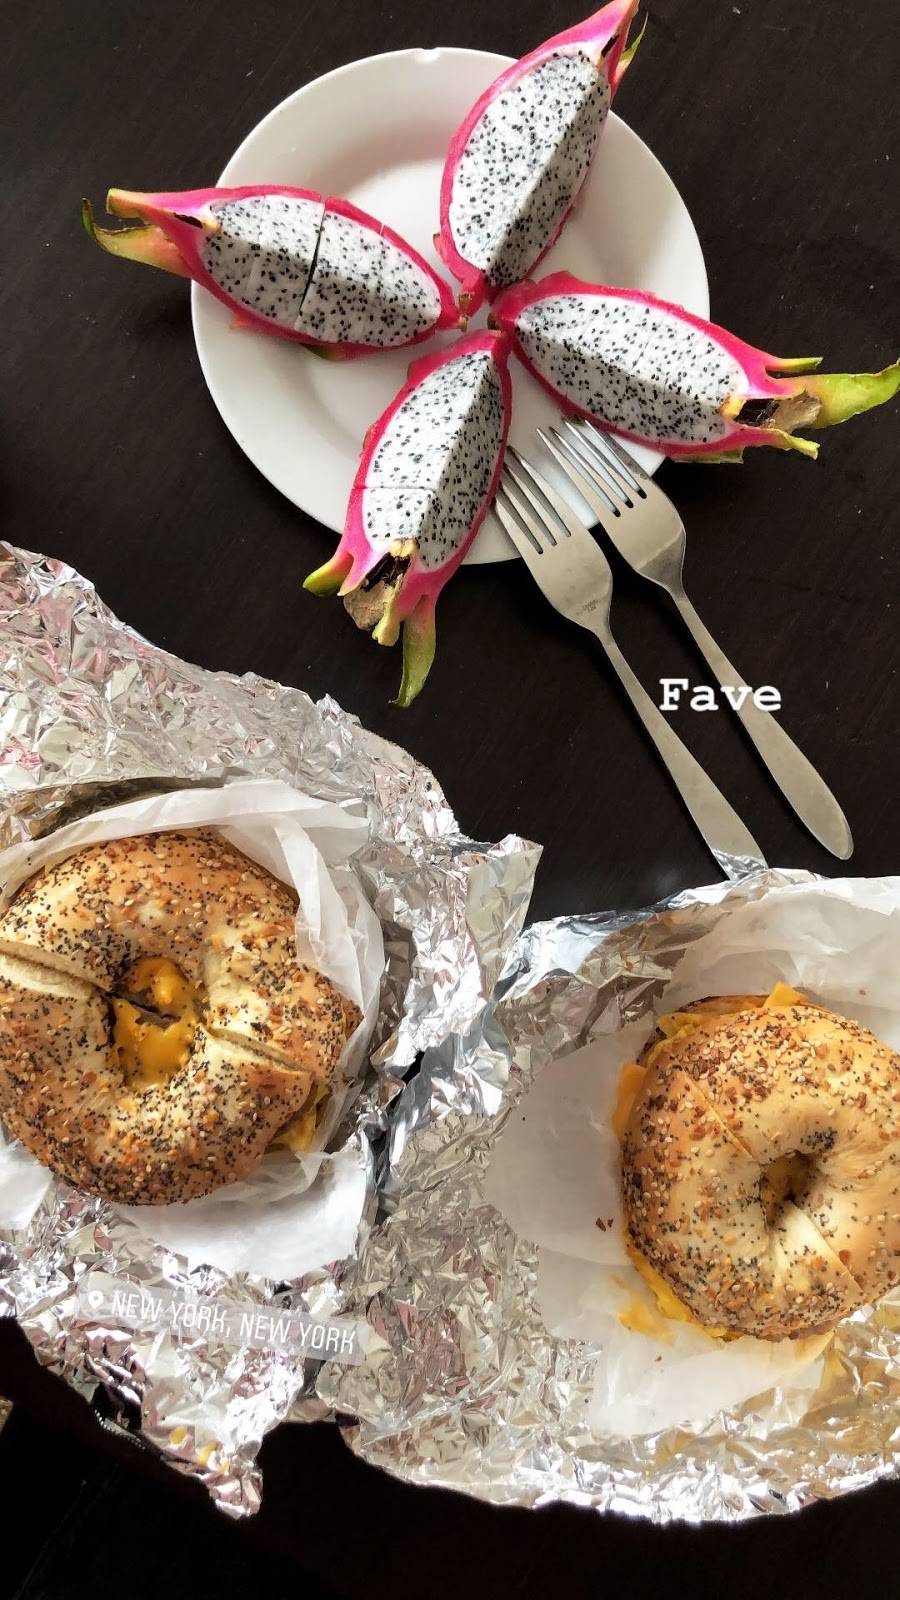 Bagelworks | bakery | 1229 1st Avenue, New York, NY 10065, USA | 2127446444 OR +1 212-744-6444